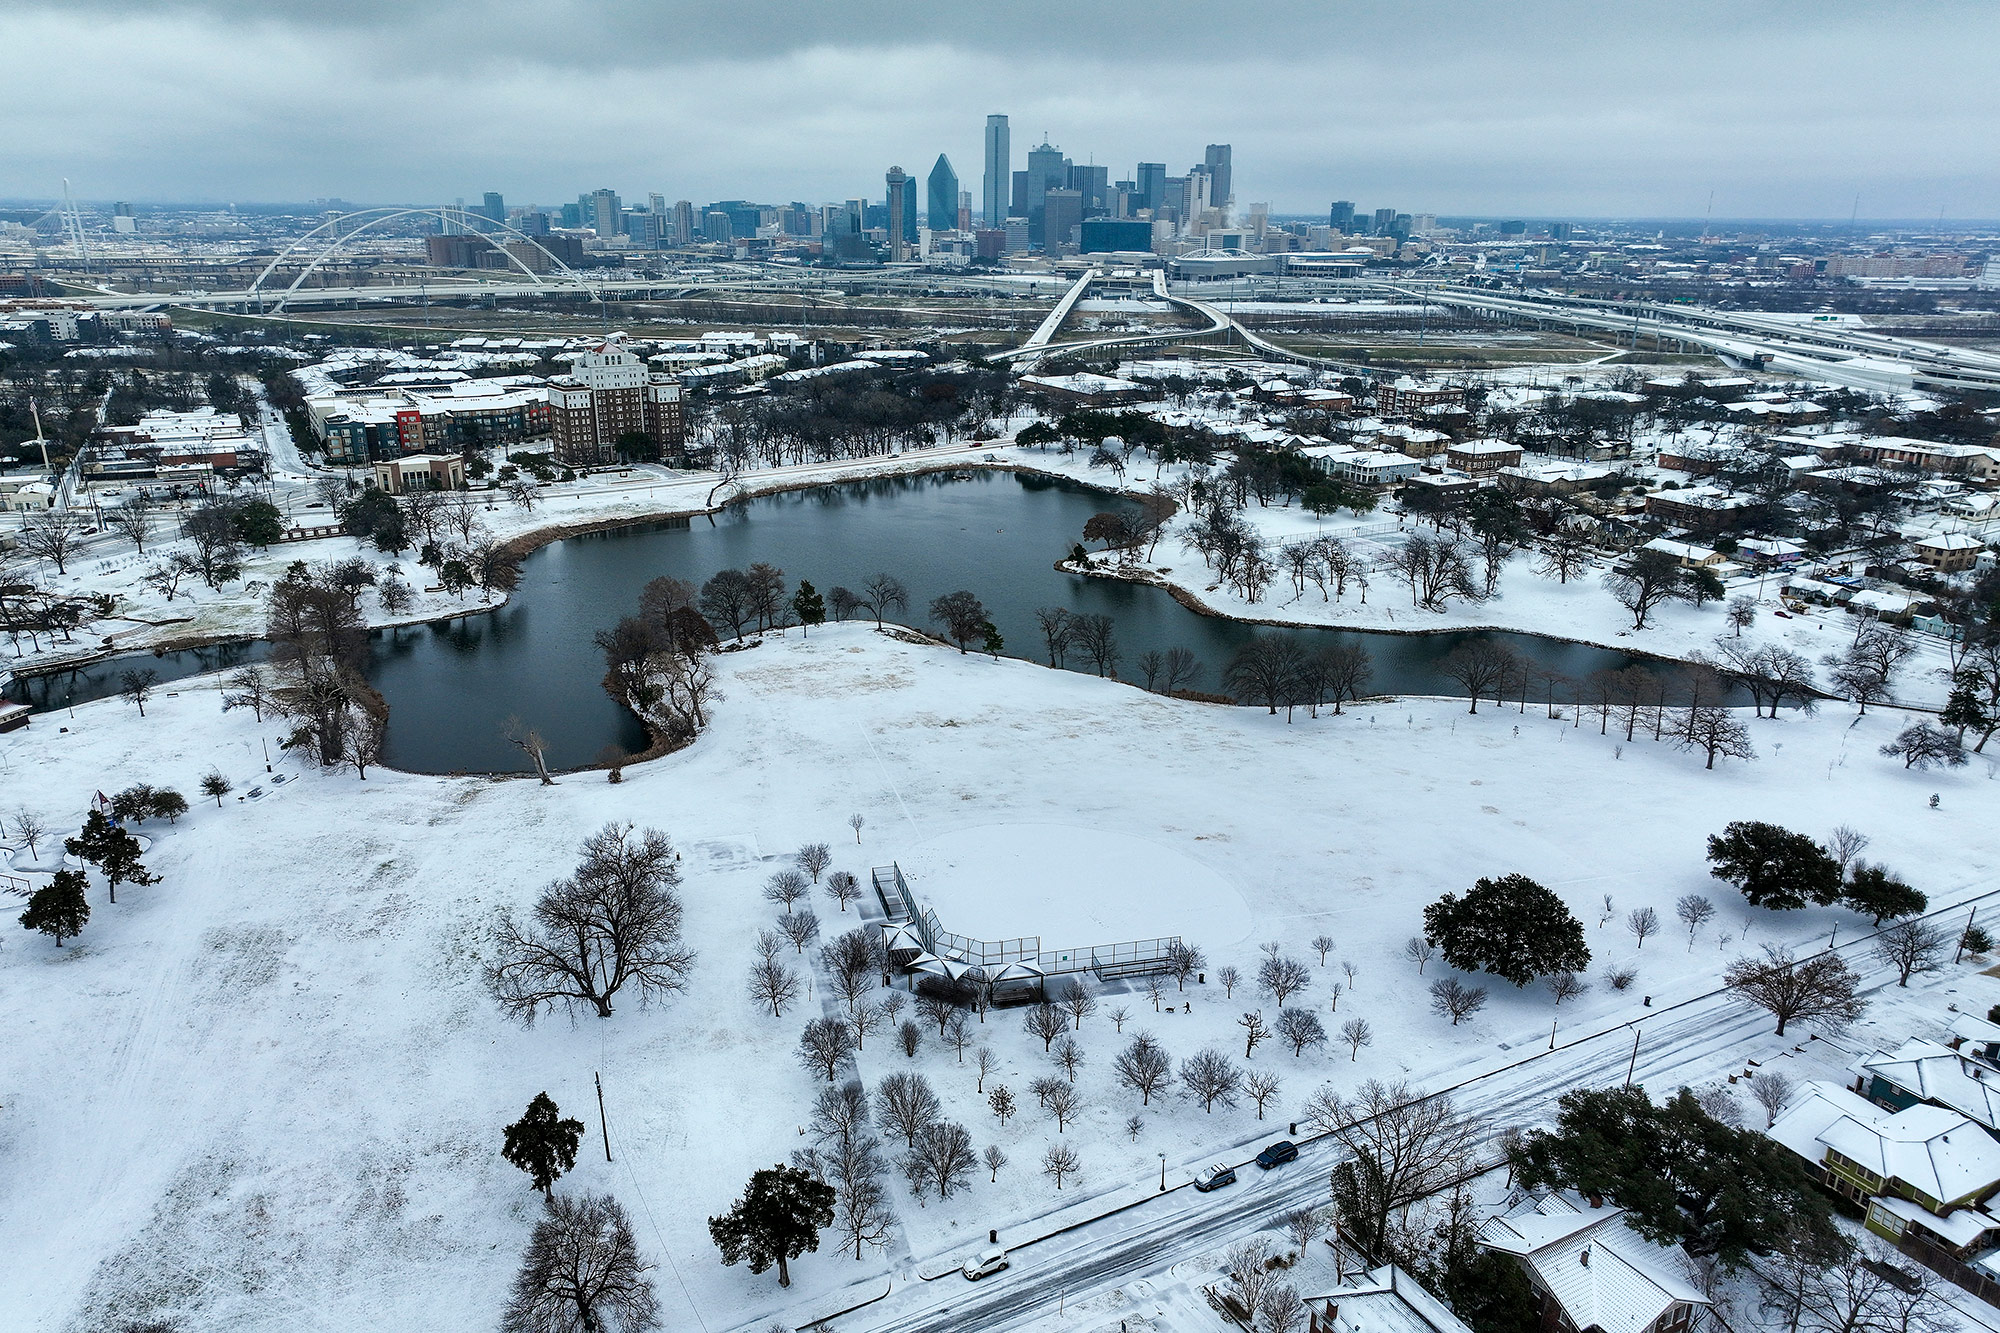 Snow blankets the ground in Dallas, on January 31.